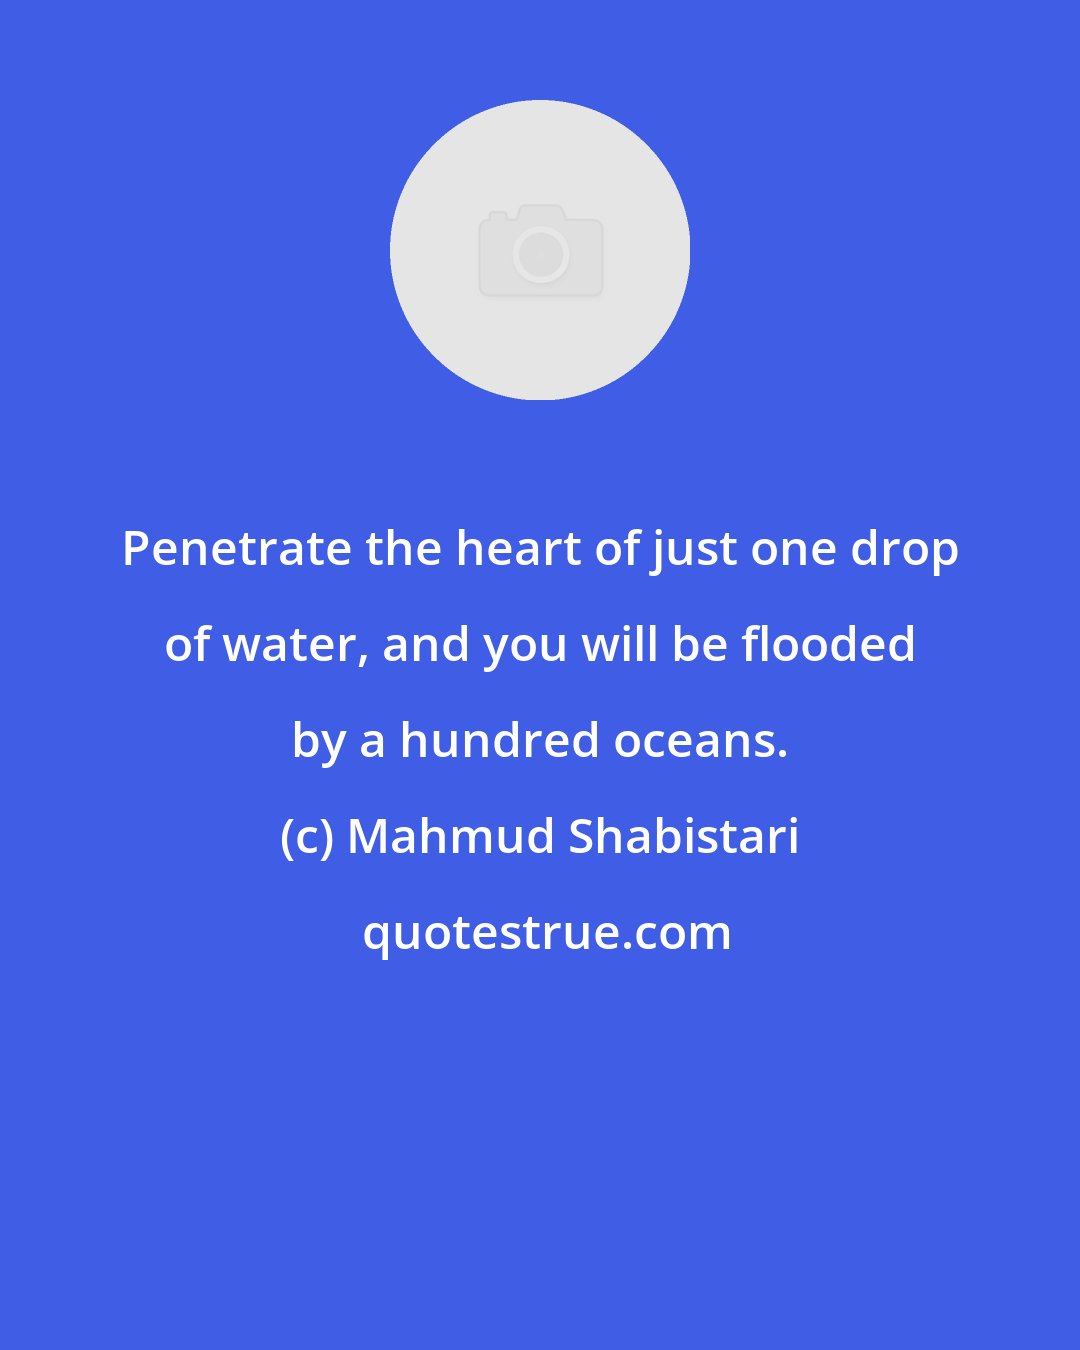 Mahmud Shabistari: Penetrate the heart of just one drop of water, and you will be flooded by a hundred oceans.